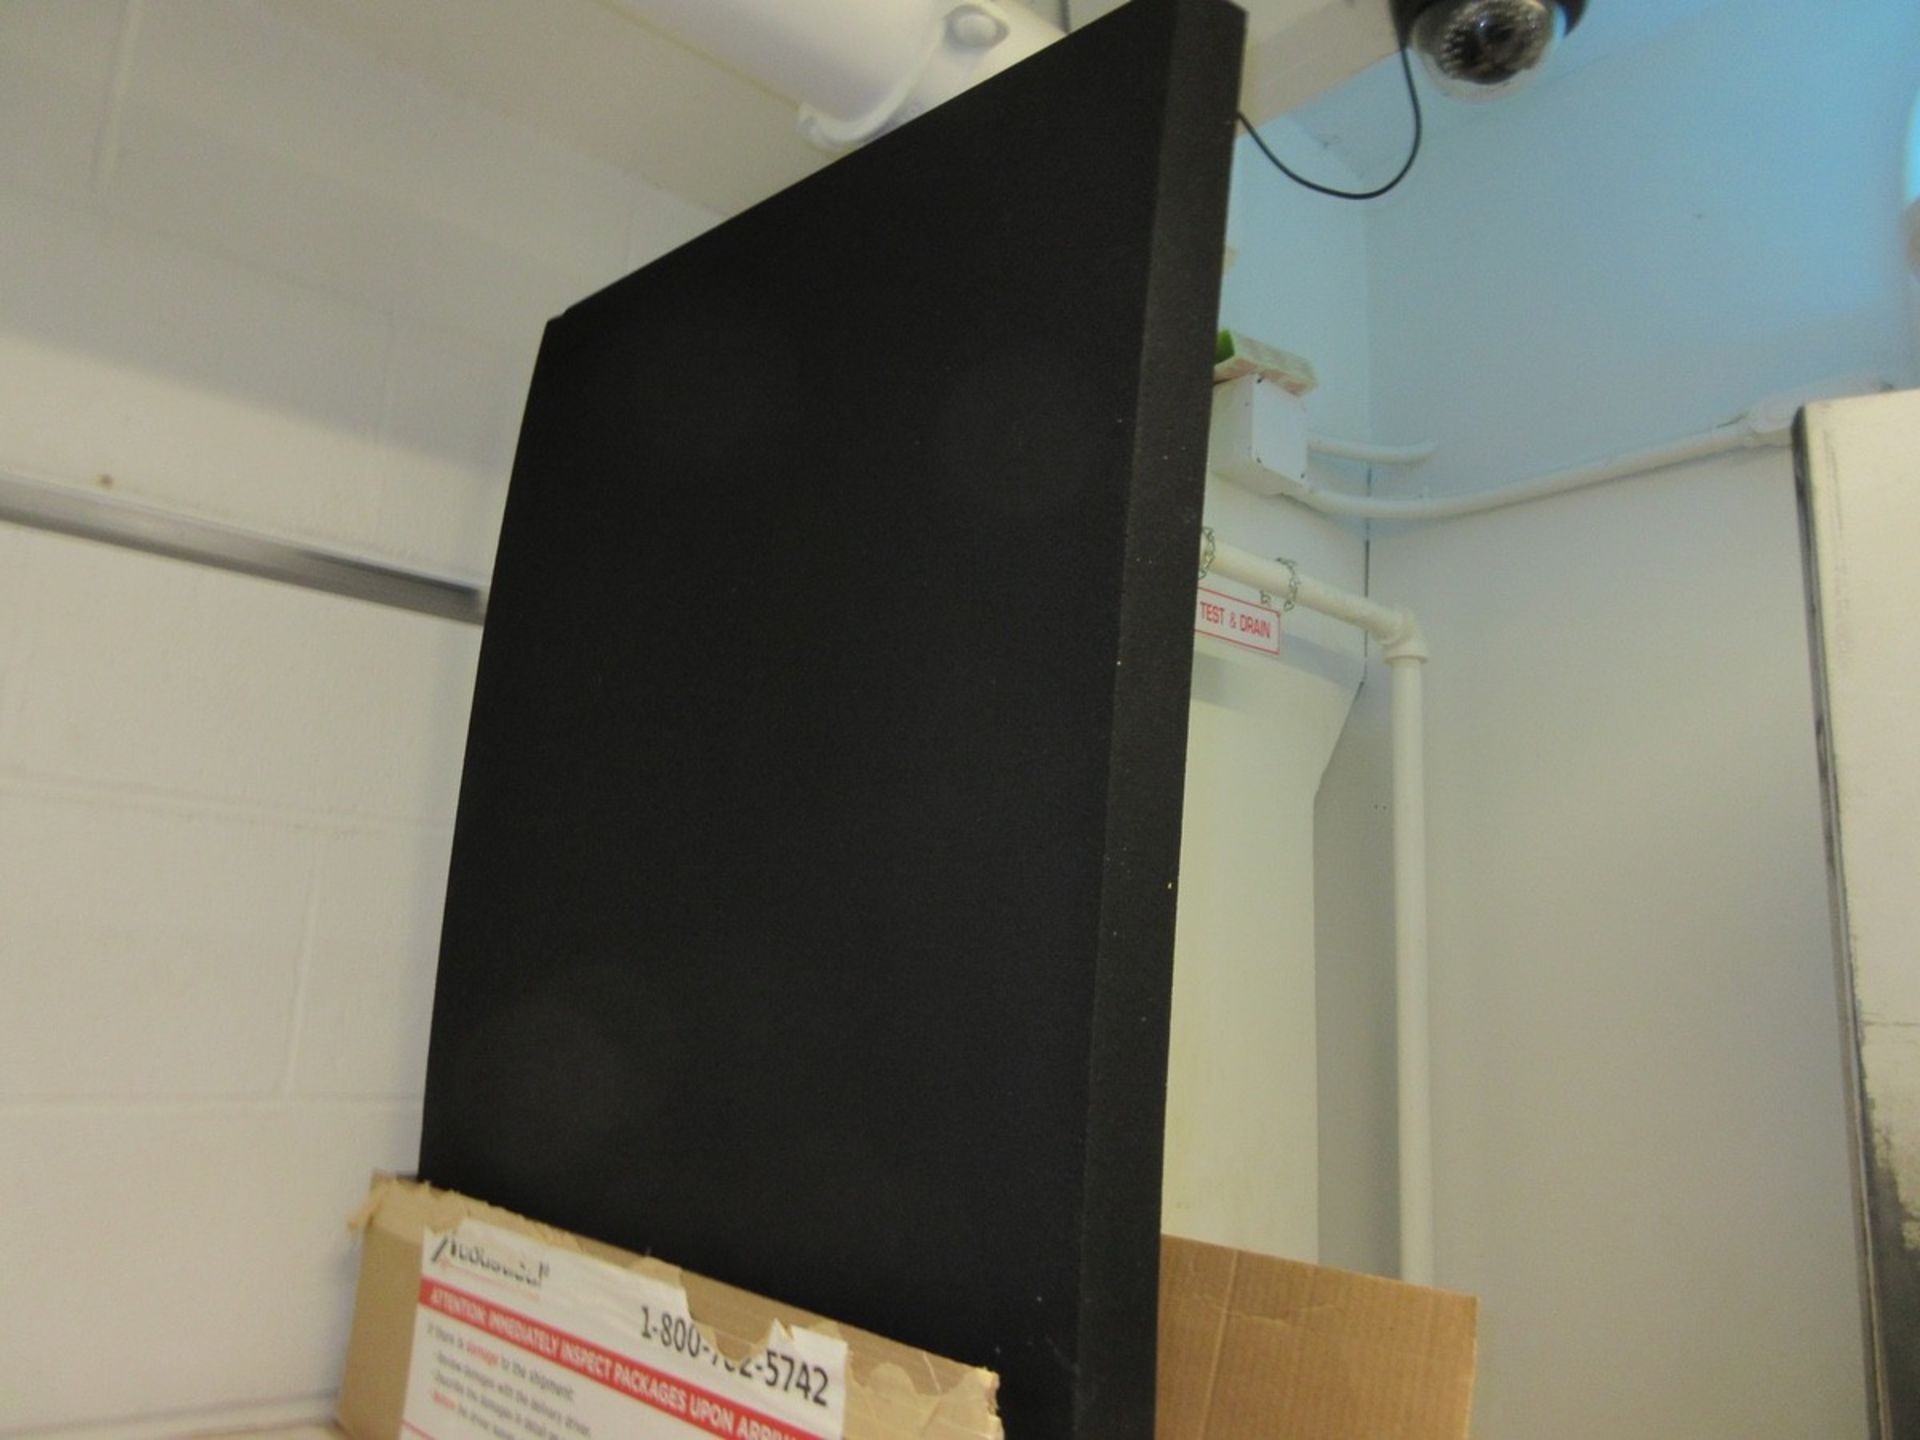 LOT (5) Cases of Acoustical Solutions Foam Tiles, Item # 35615, Black, Approx. 25 Pcs. Total - Image 3 of 3